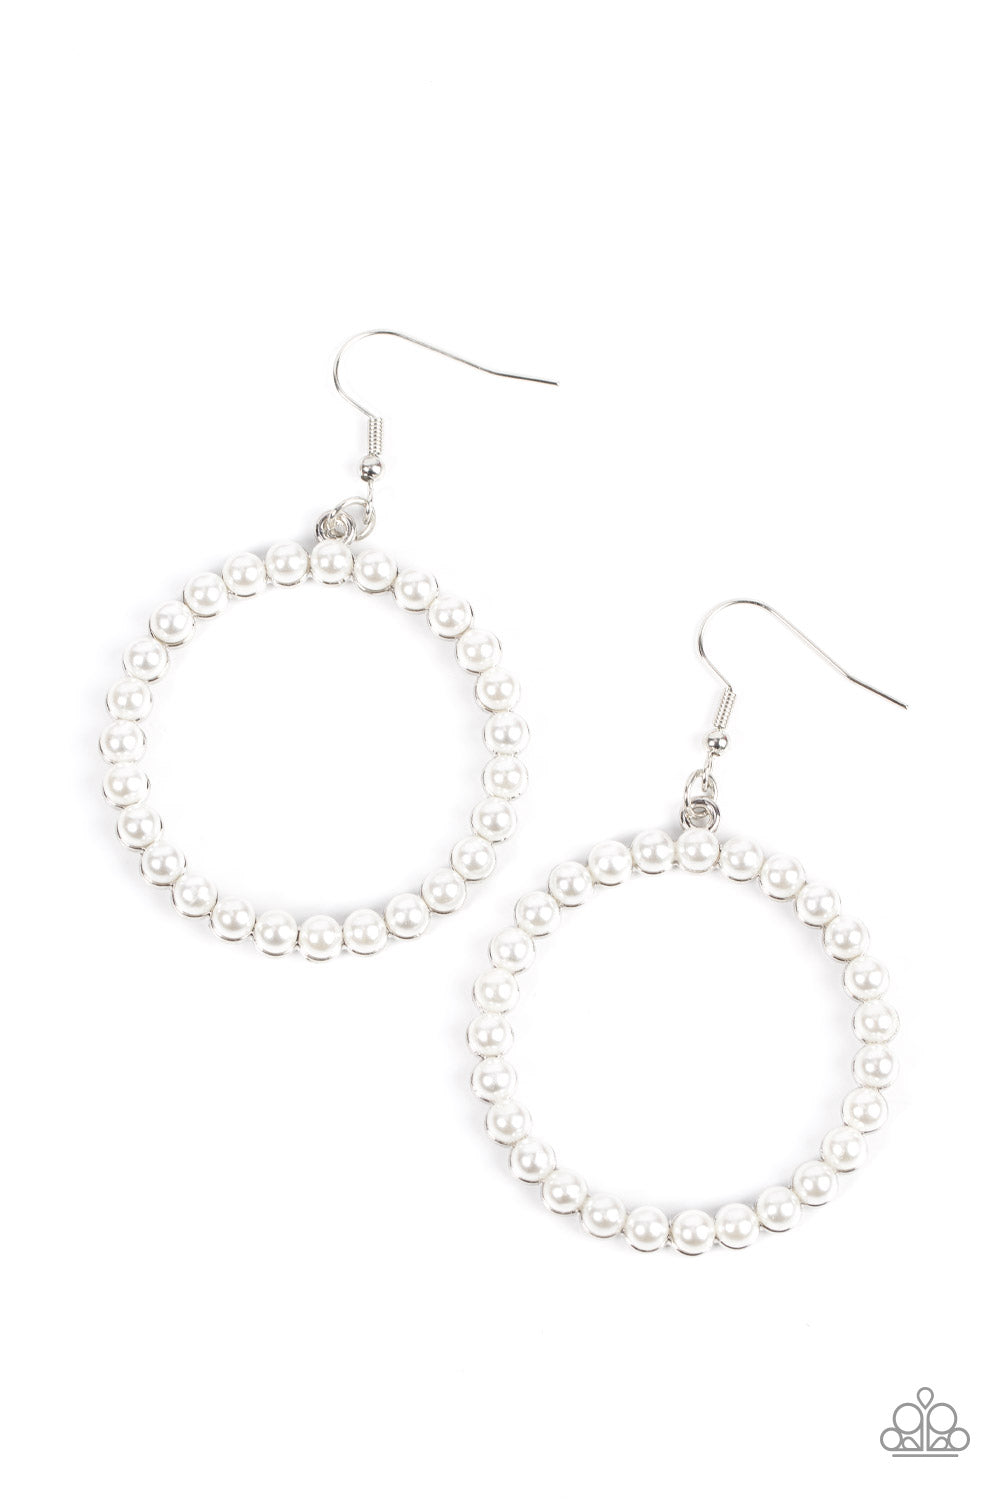 five-dollar-jewelry-can-i-get-a-hallelujah-white-earrings-paparazzi-accessories